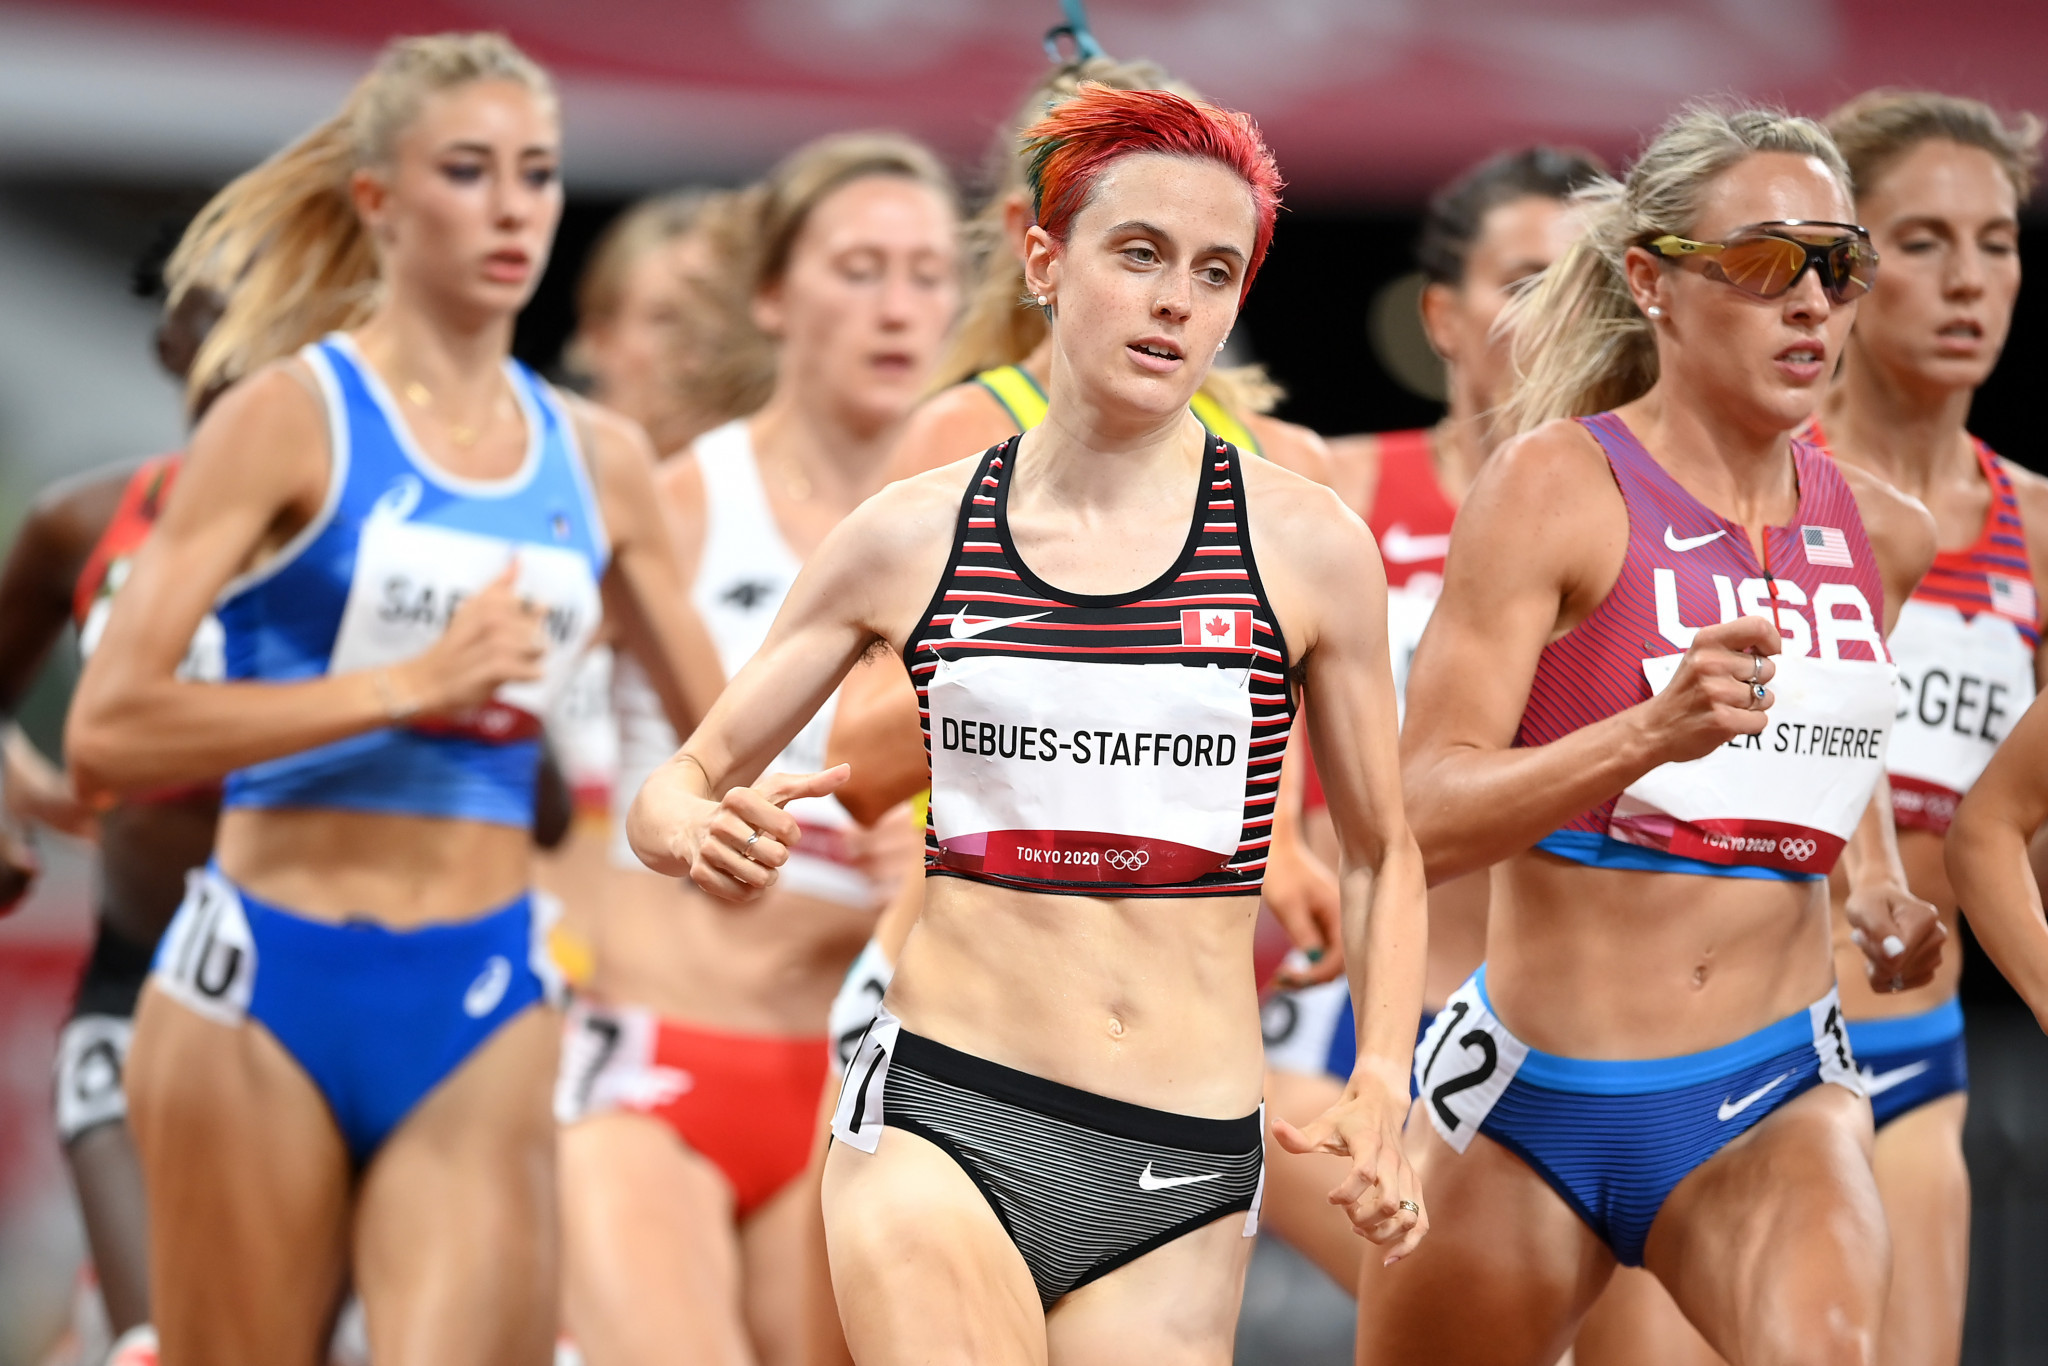 DeBues-Stafford cites "stress" of Houlihan doping ban for departure from Bowerman Track Club